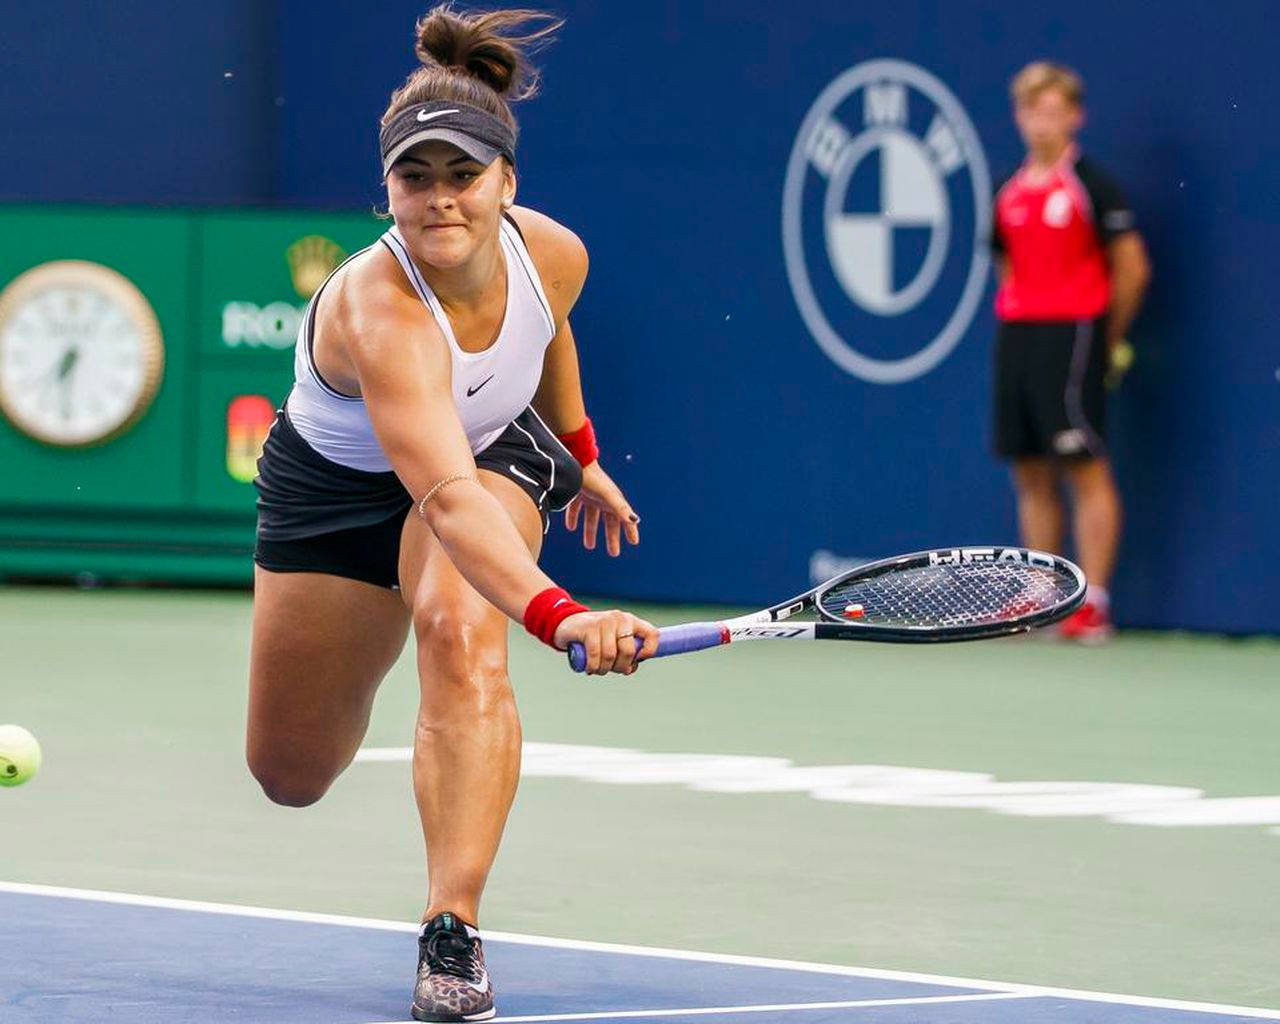 Empowering Stance - Bianca Andreescu at Tennis Court Wallpaper